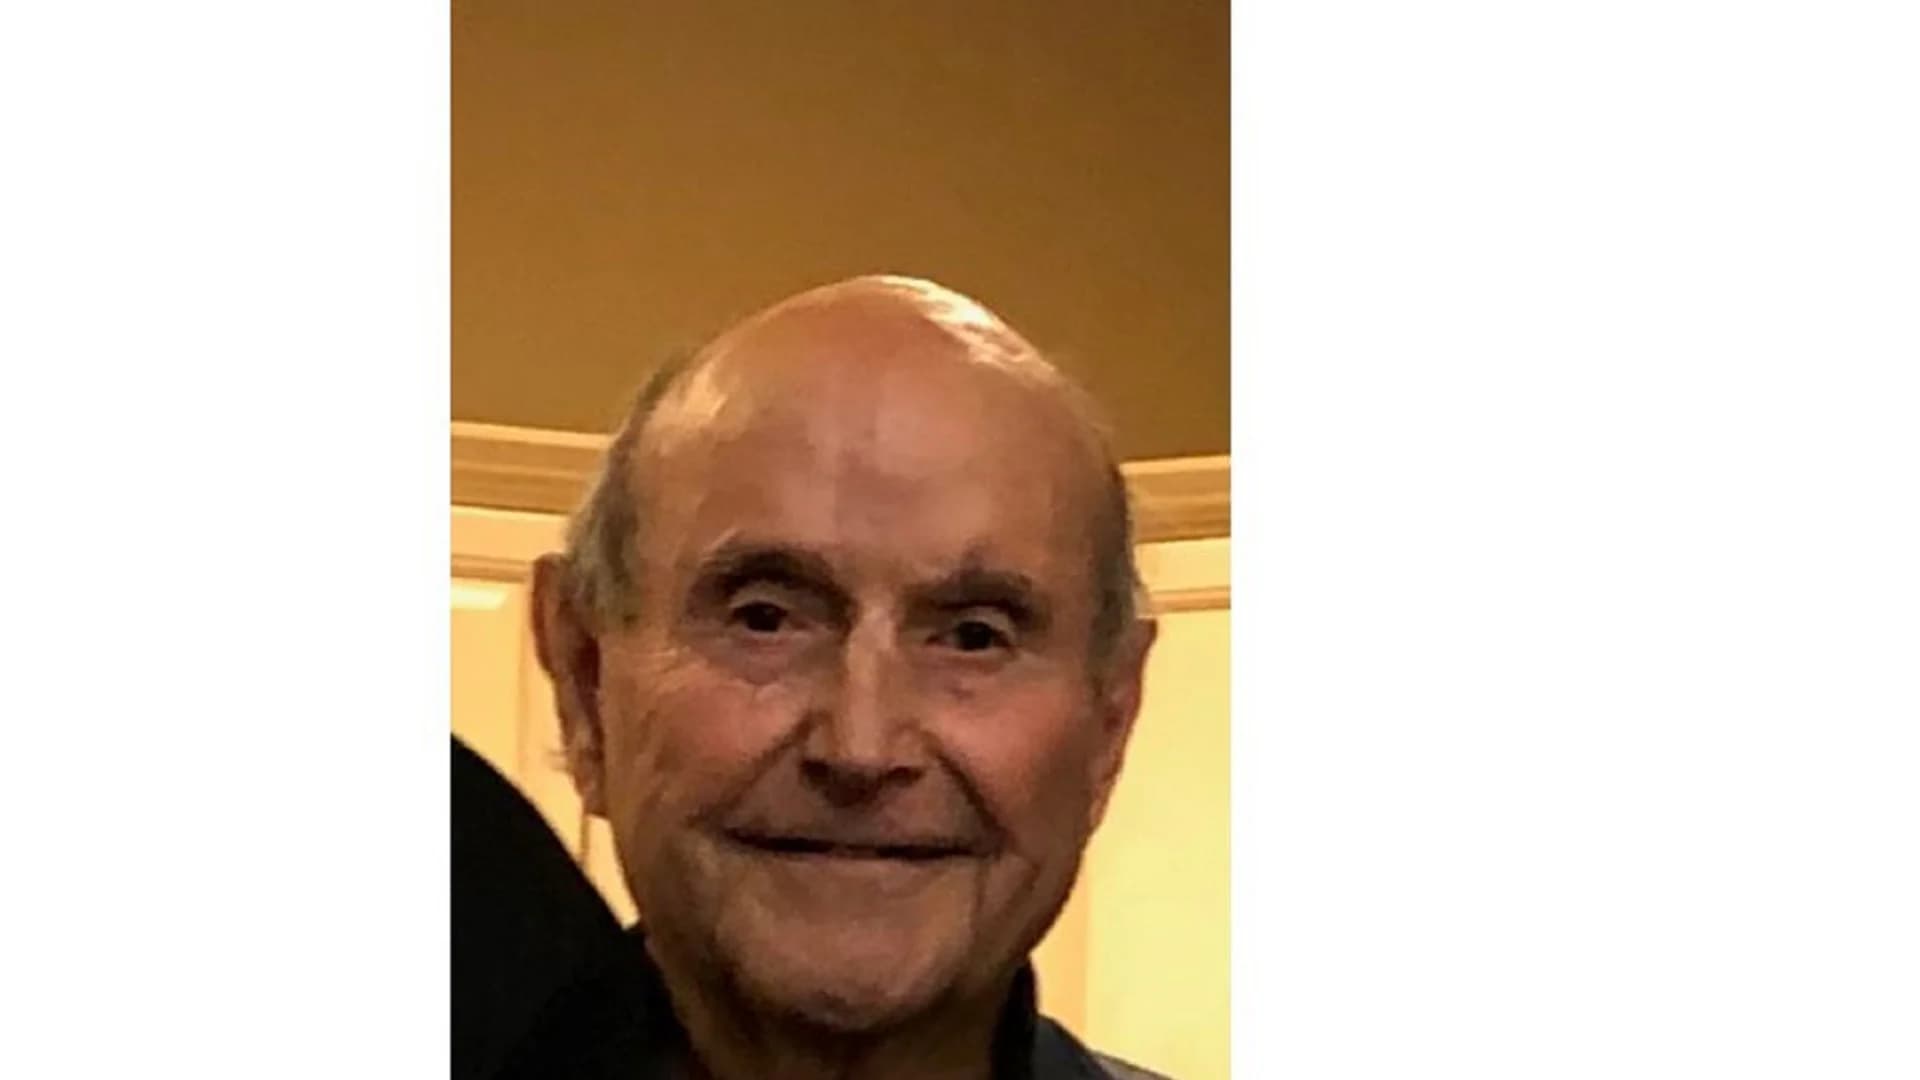 Police locate elderly man reported missing in North Hills